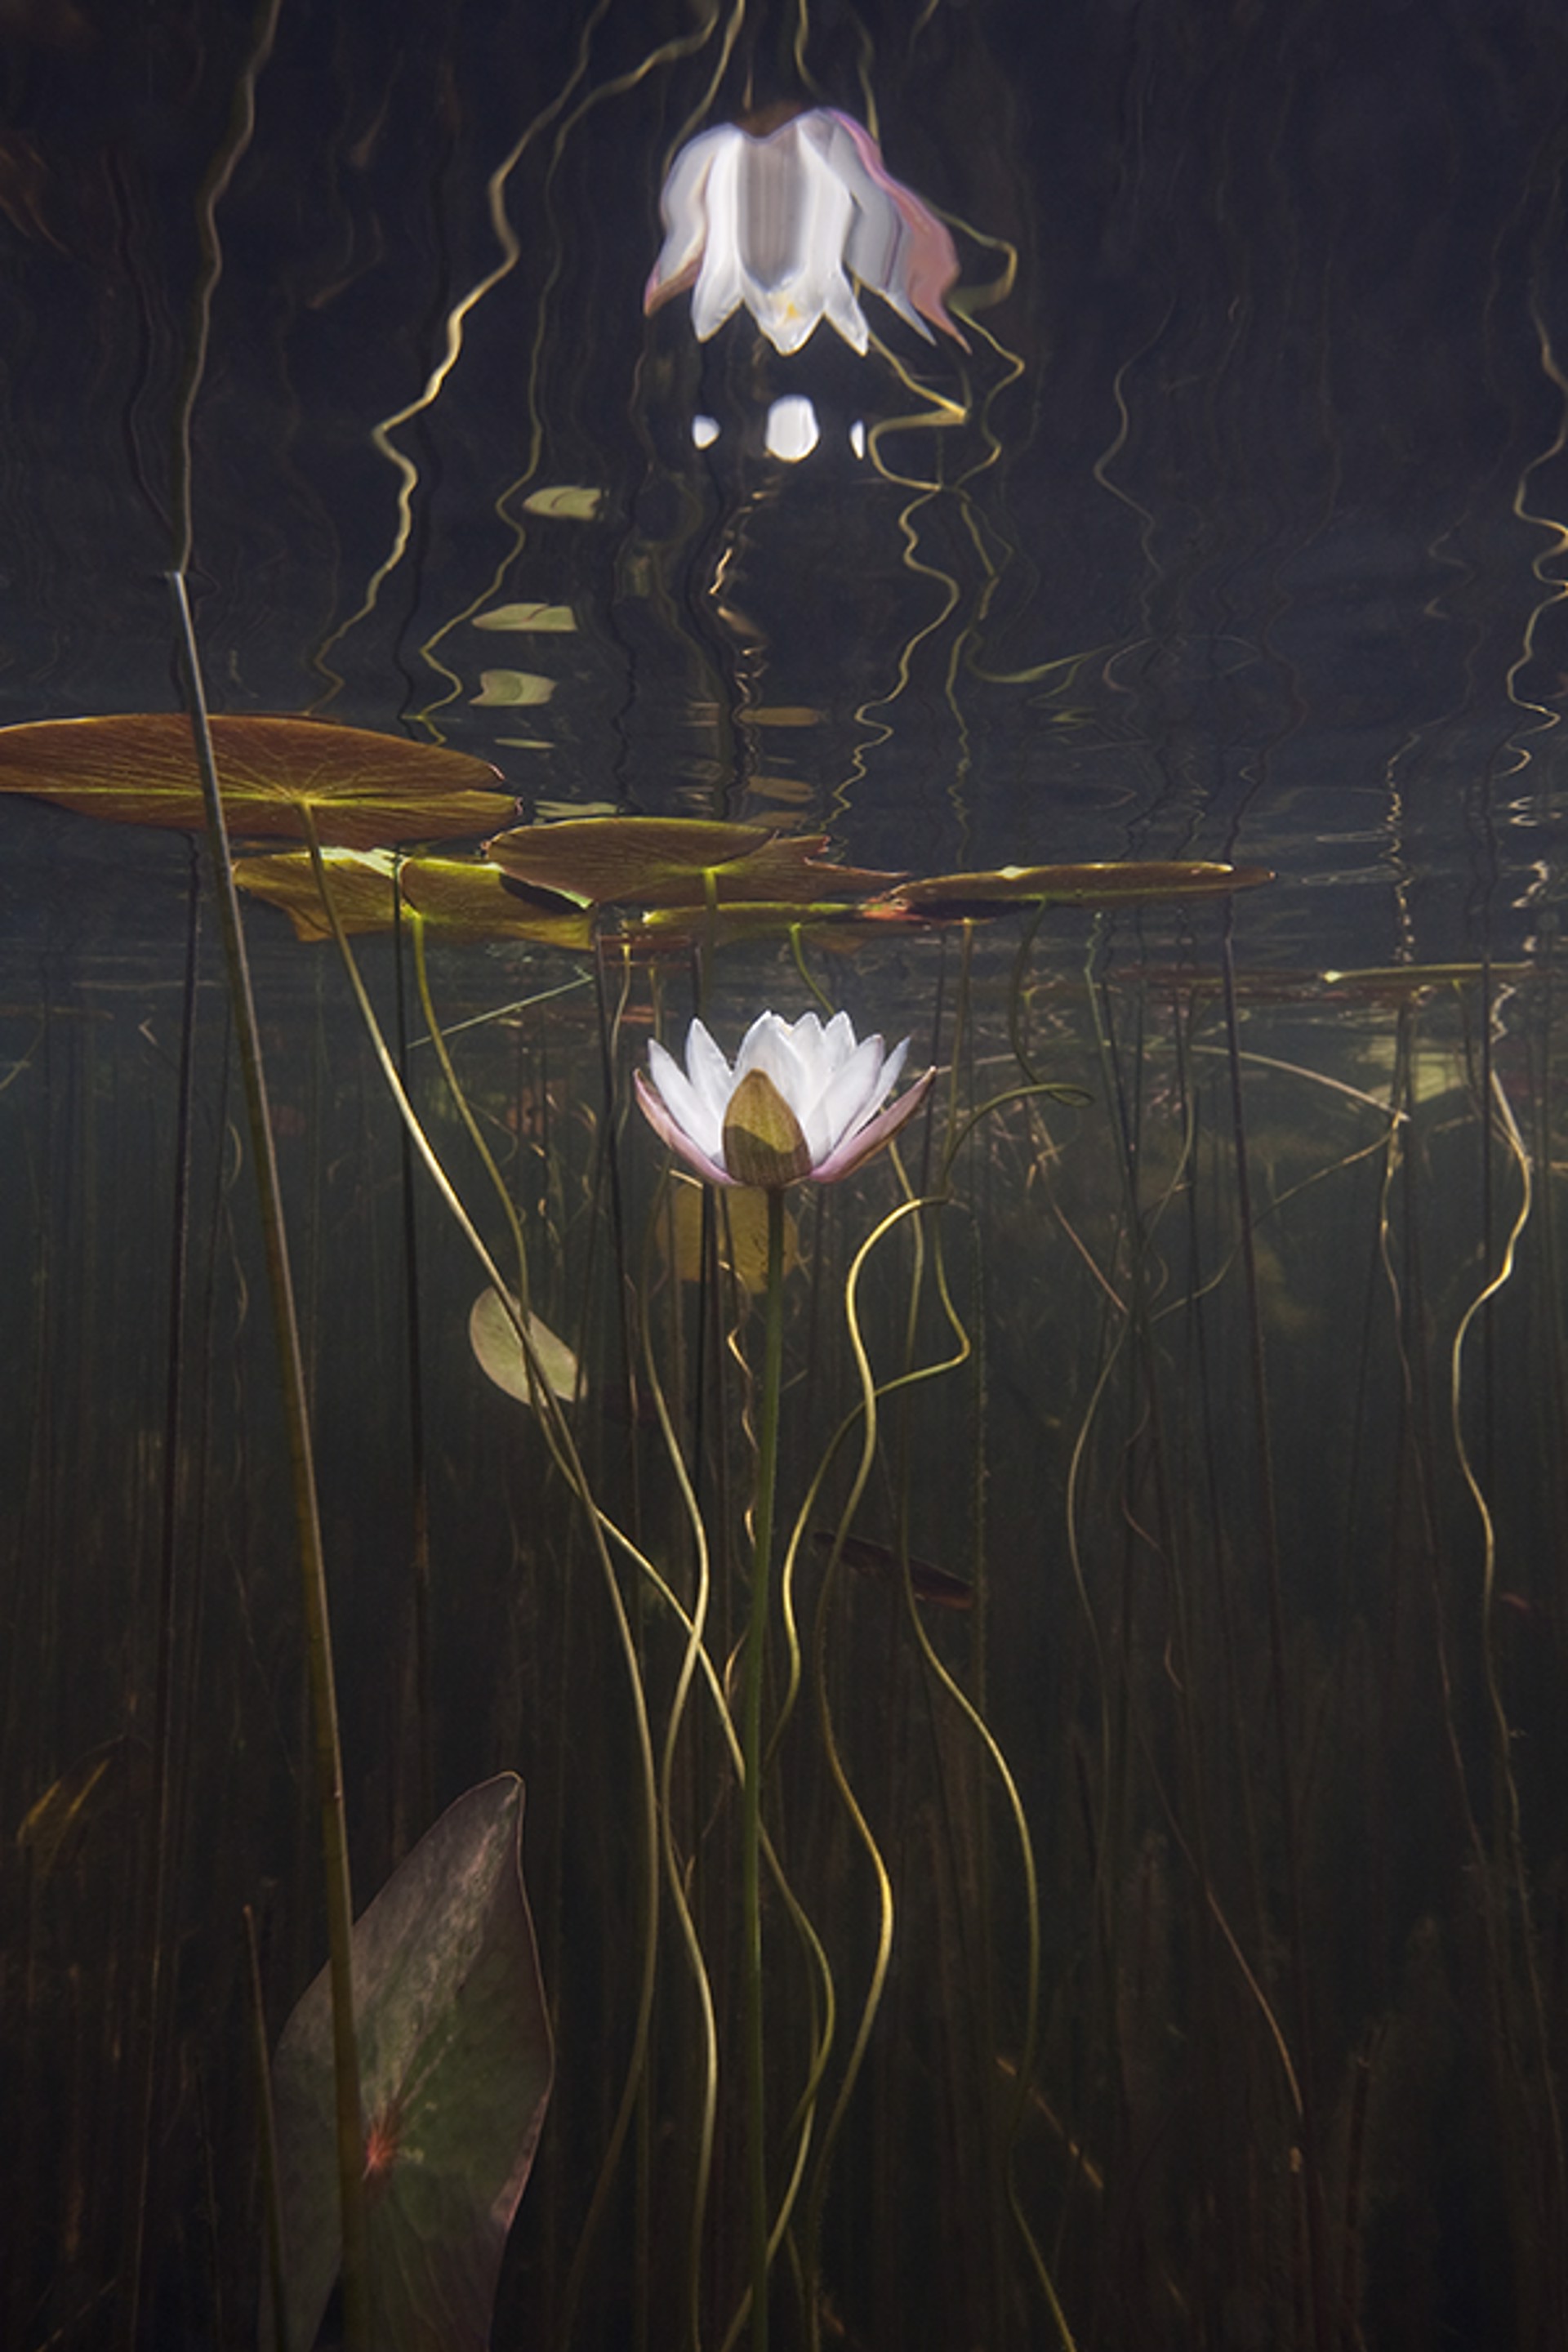 WATER LILY STUDY NO. 20 by WILLIAM SCULLY